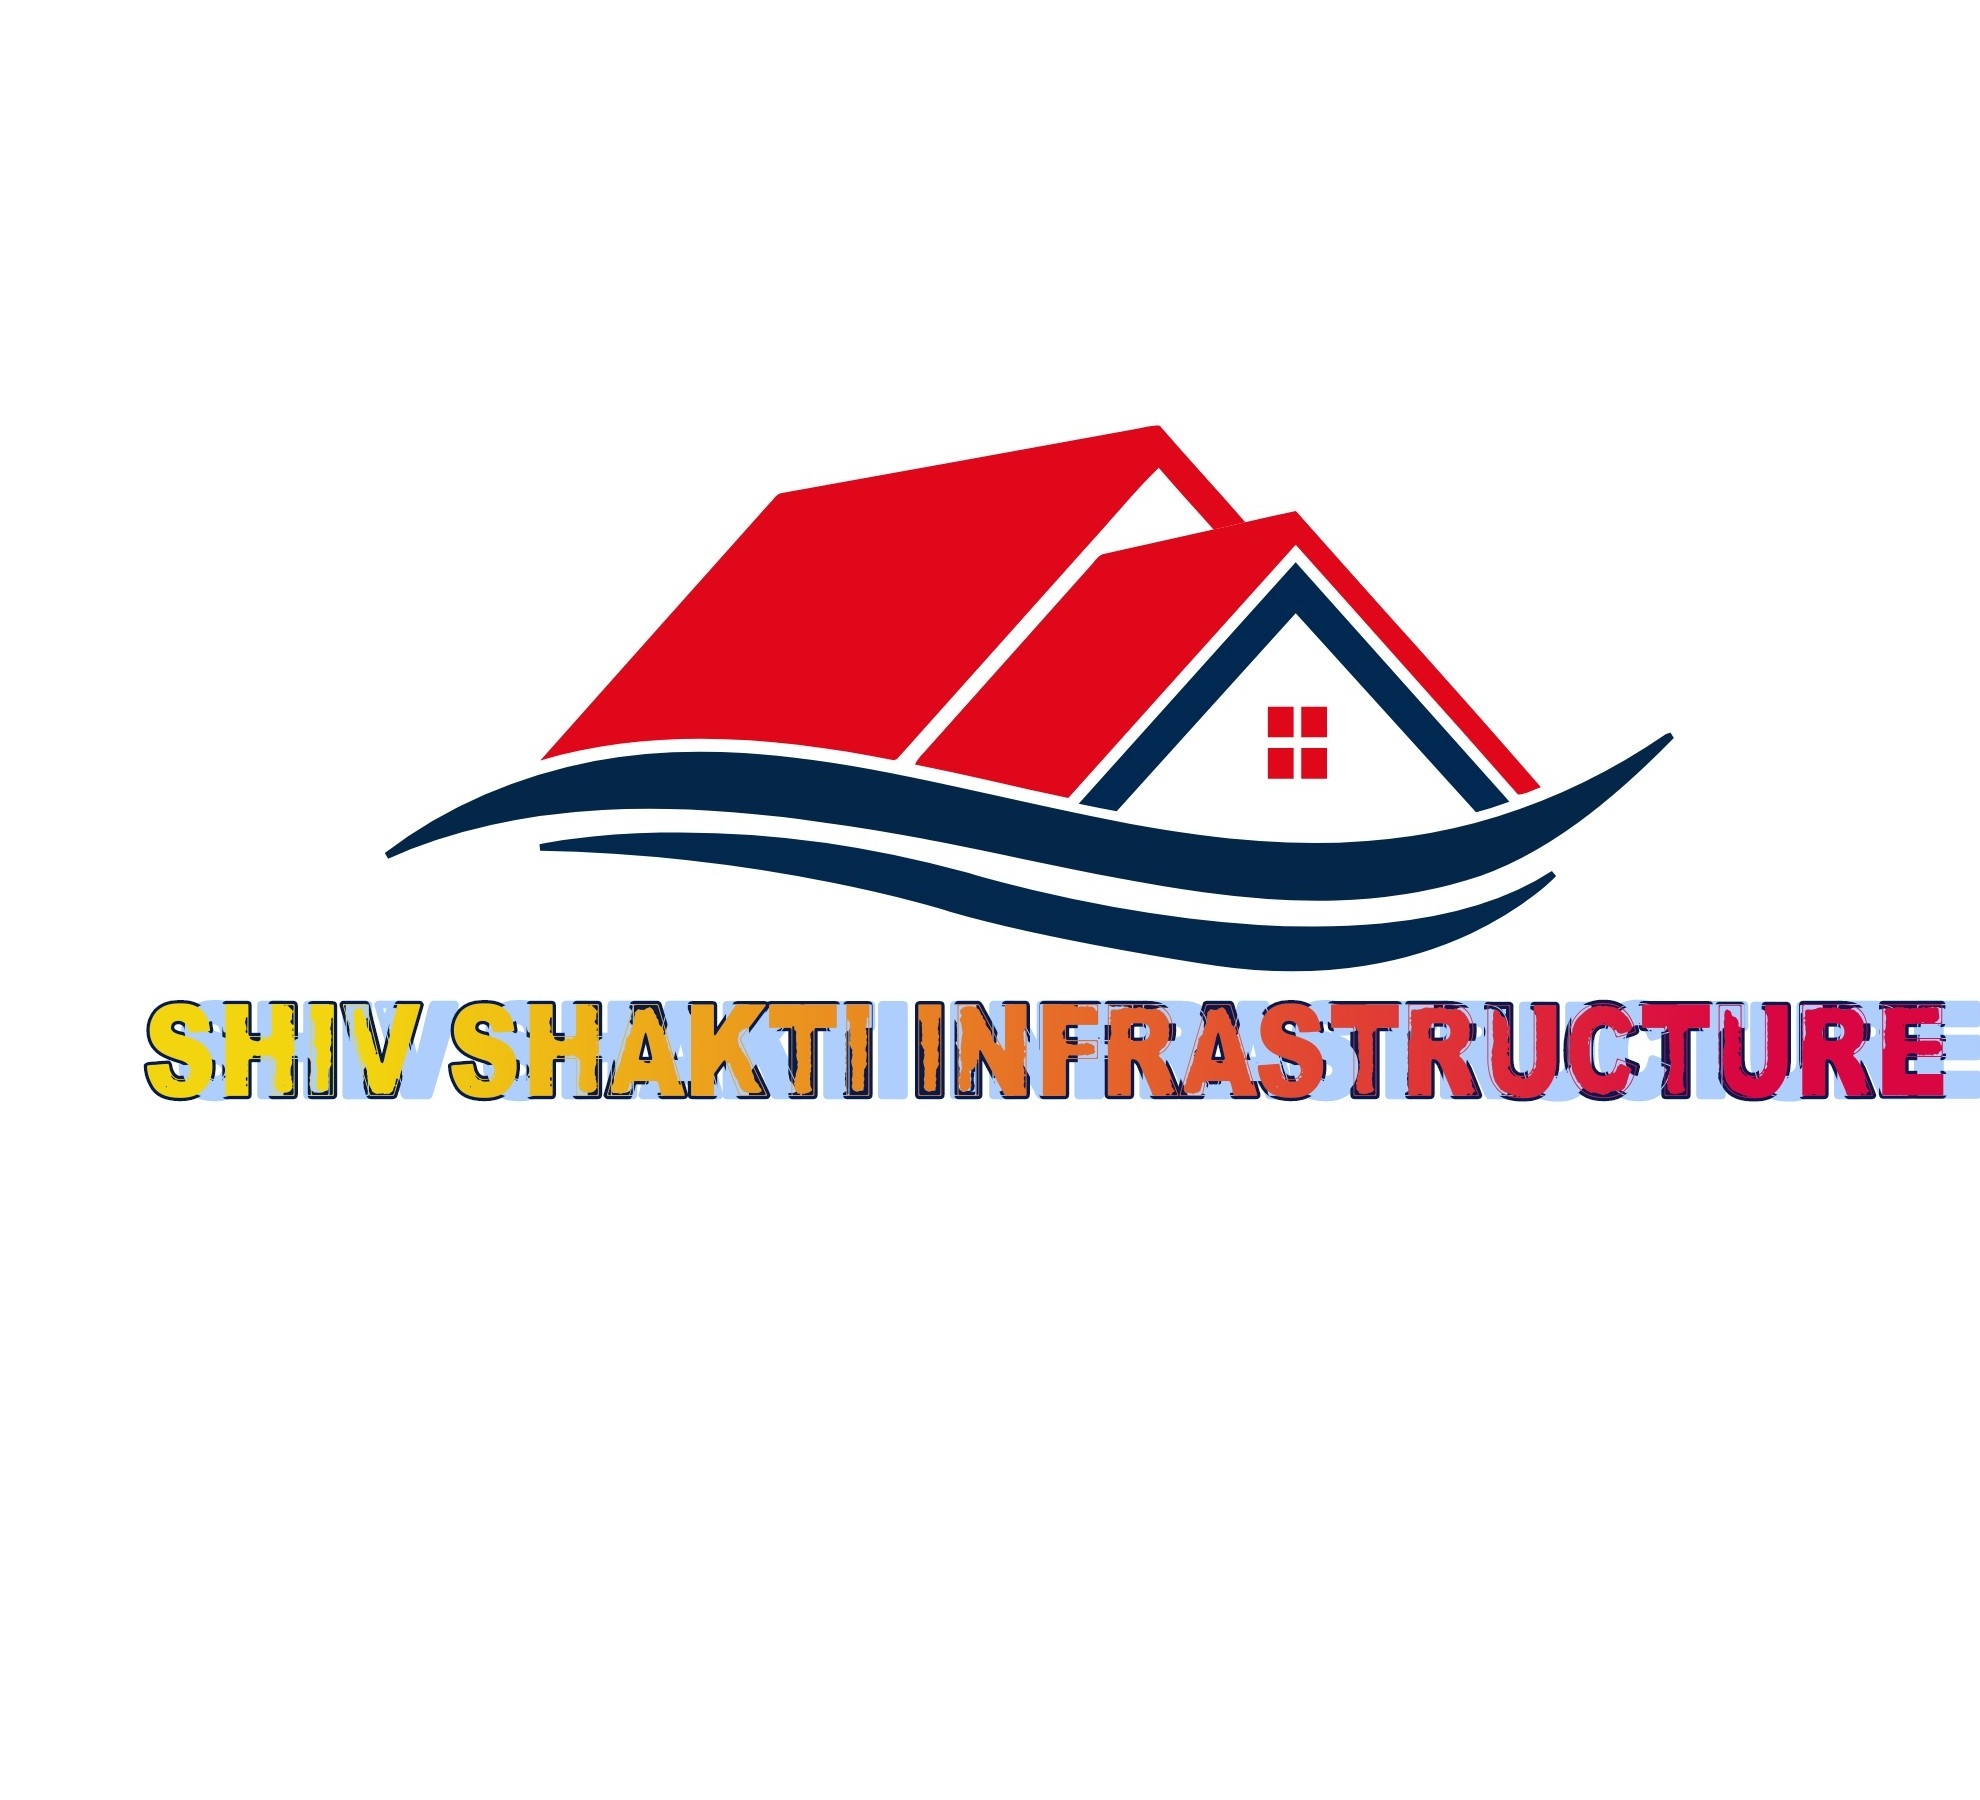 Road Infrastructure Logo: Over 1,271 Royalty-Free Licensable Stock  Illustrations & Drawings | Shutterstock